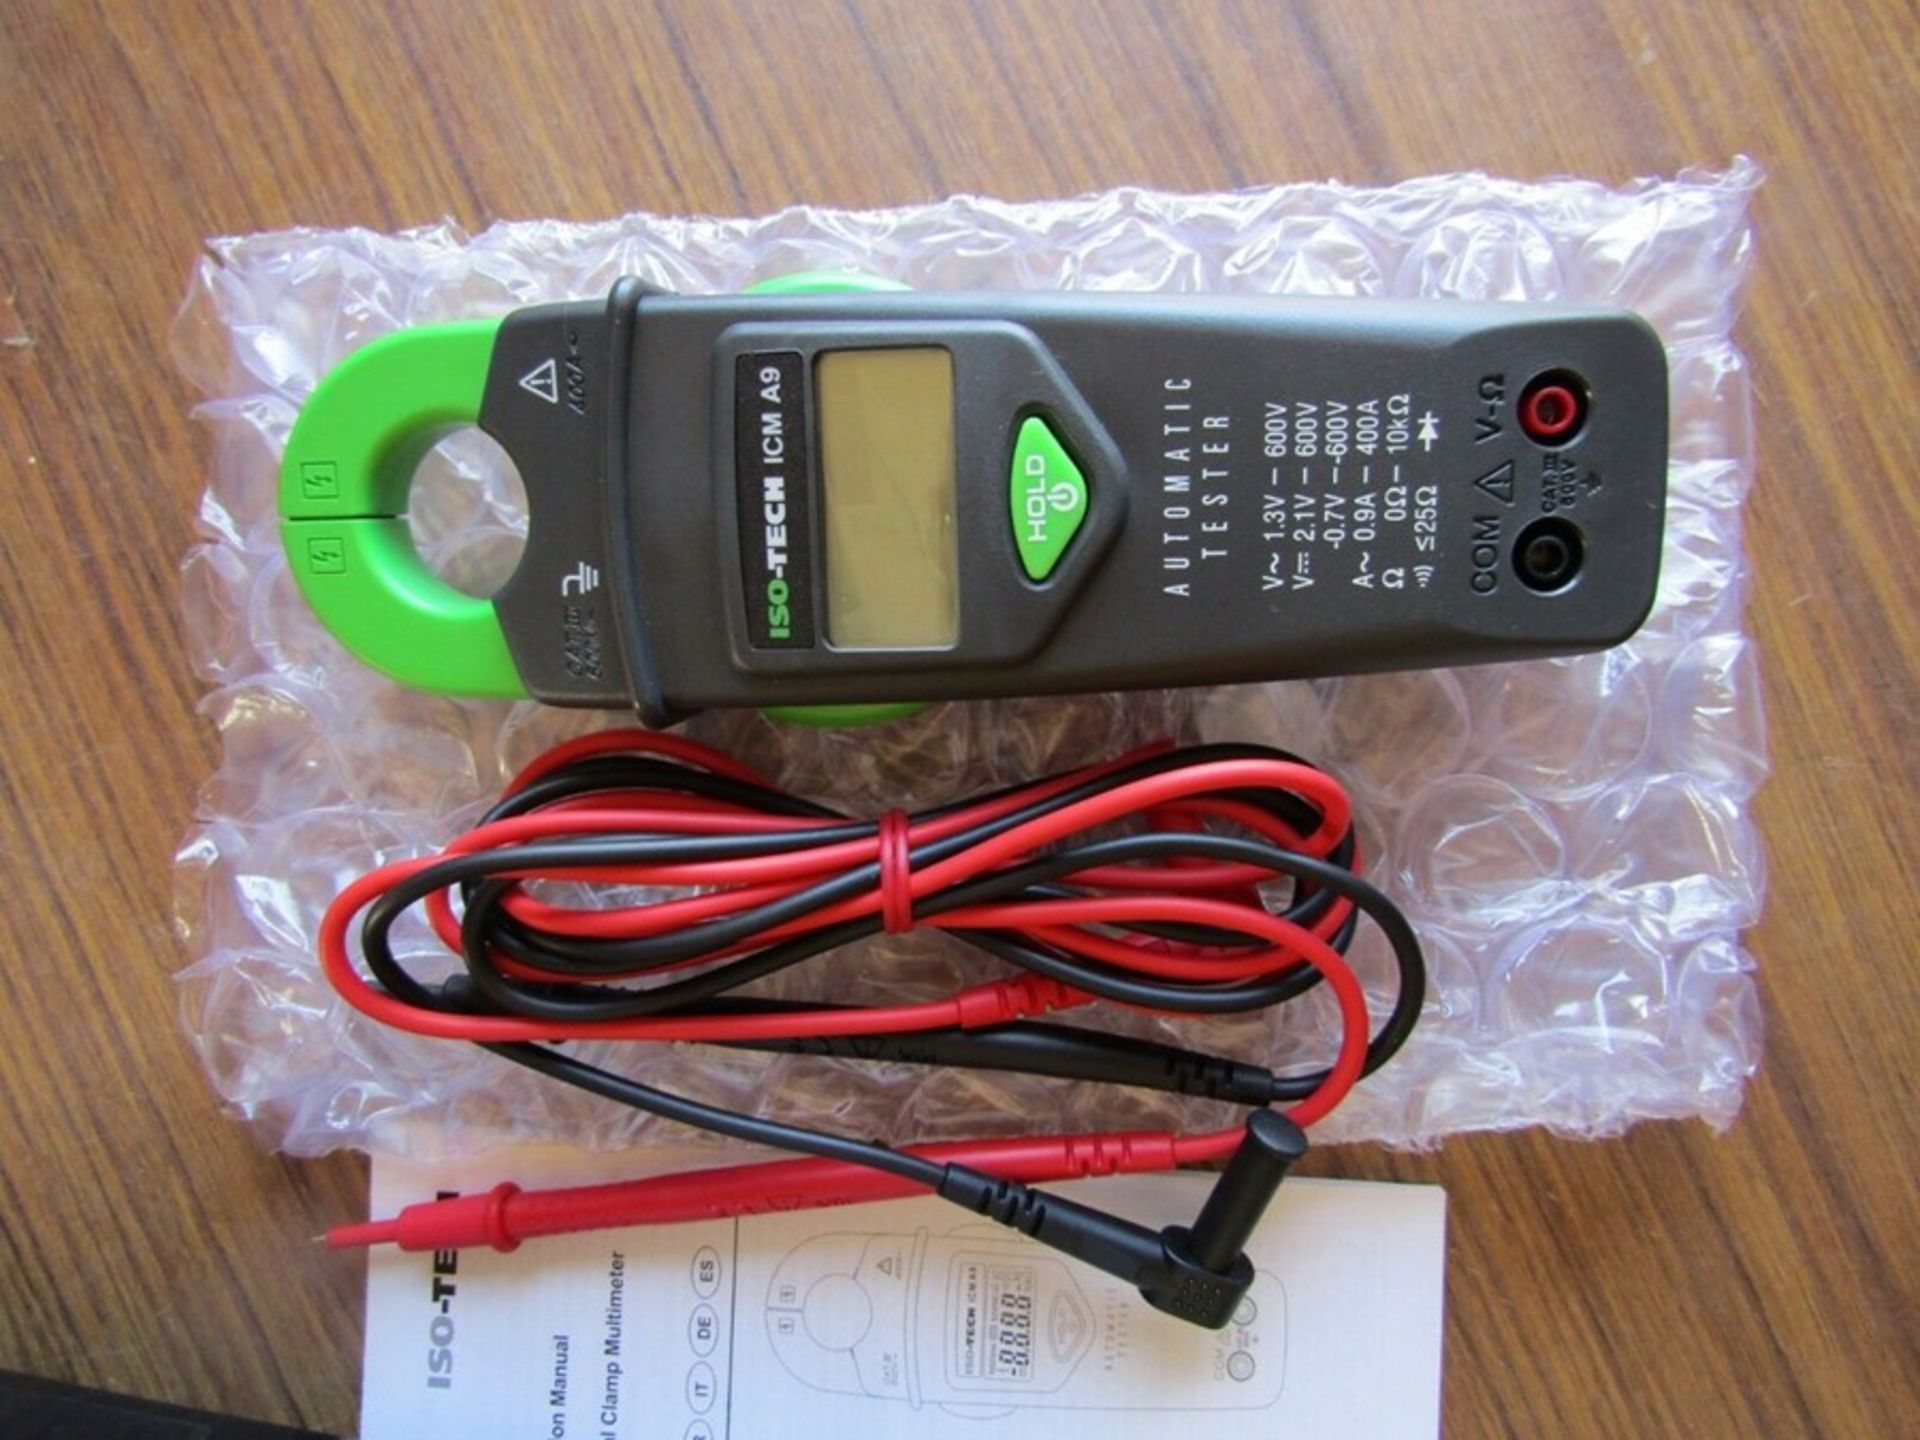 16 x ISO-TECH ICM A9 Clamp Meter, AC/DC Tester Max 600A ac CAT III 600V